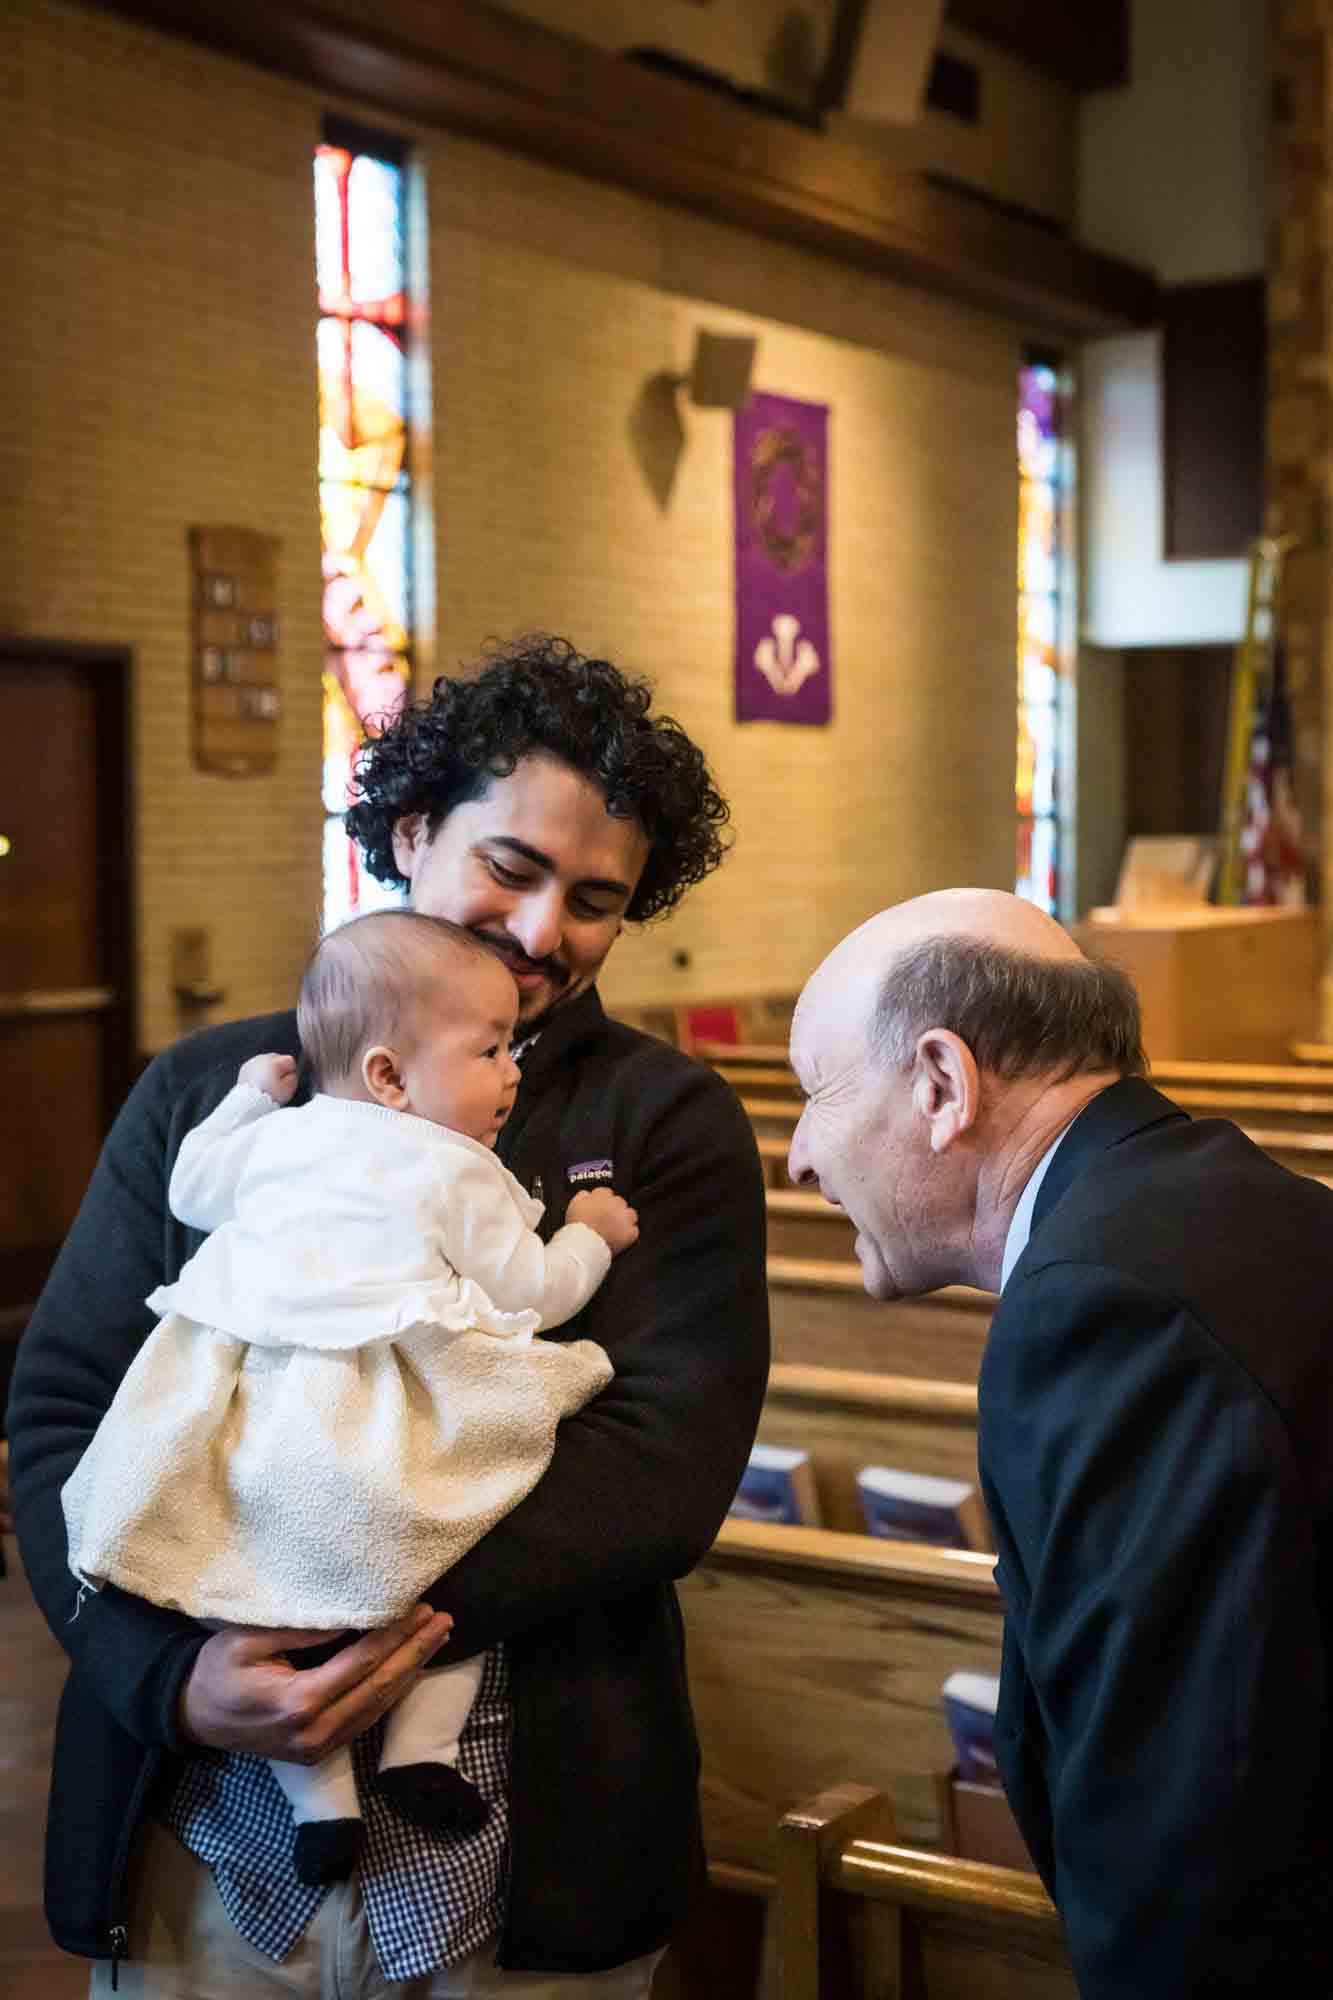 Maspeth baptism photos of father showing baby to grandfather in church